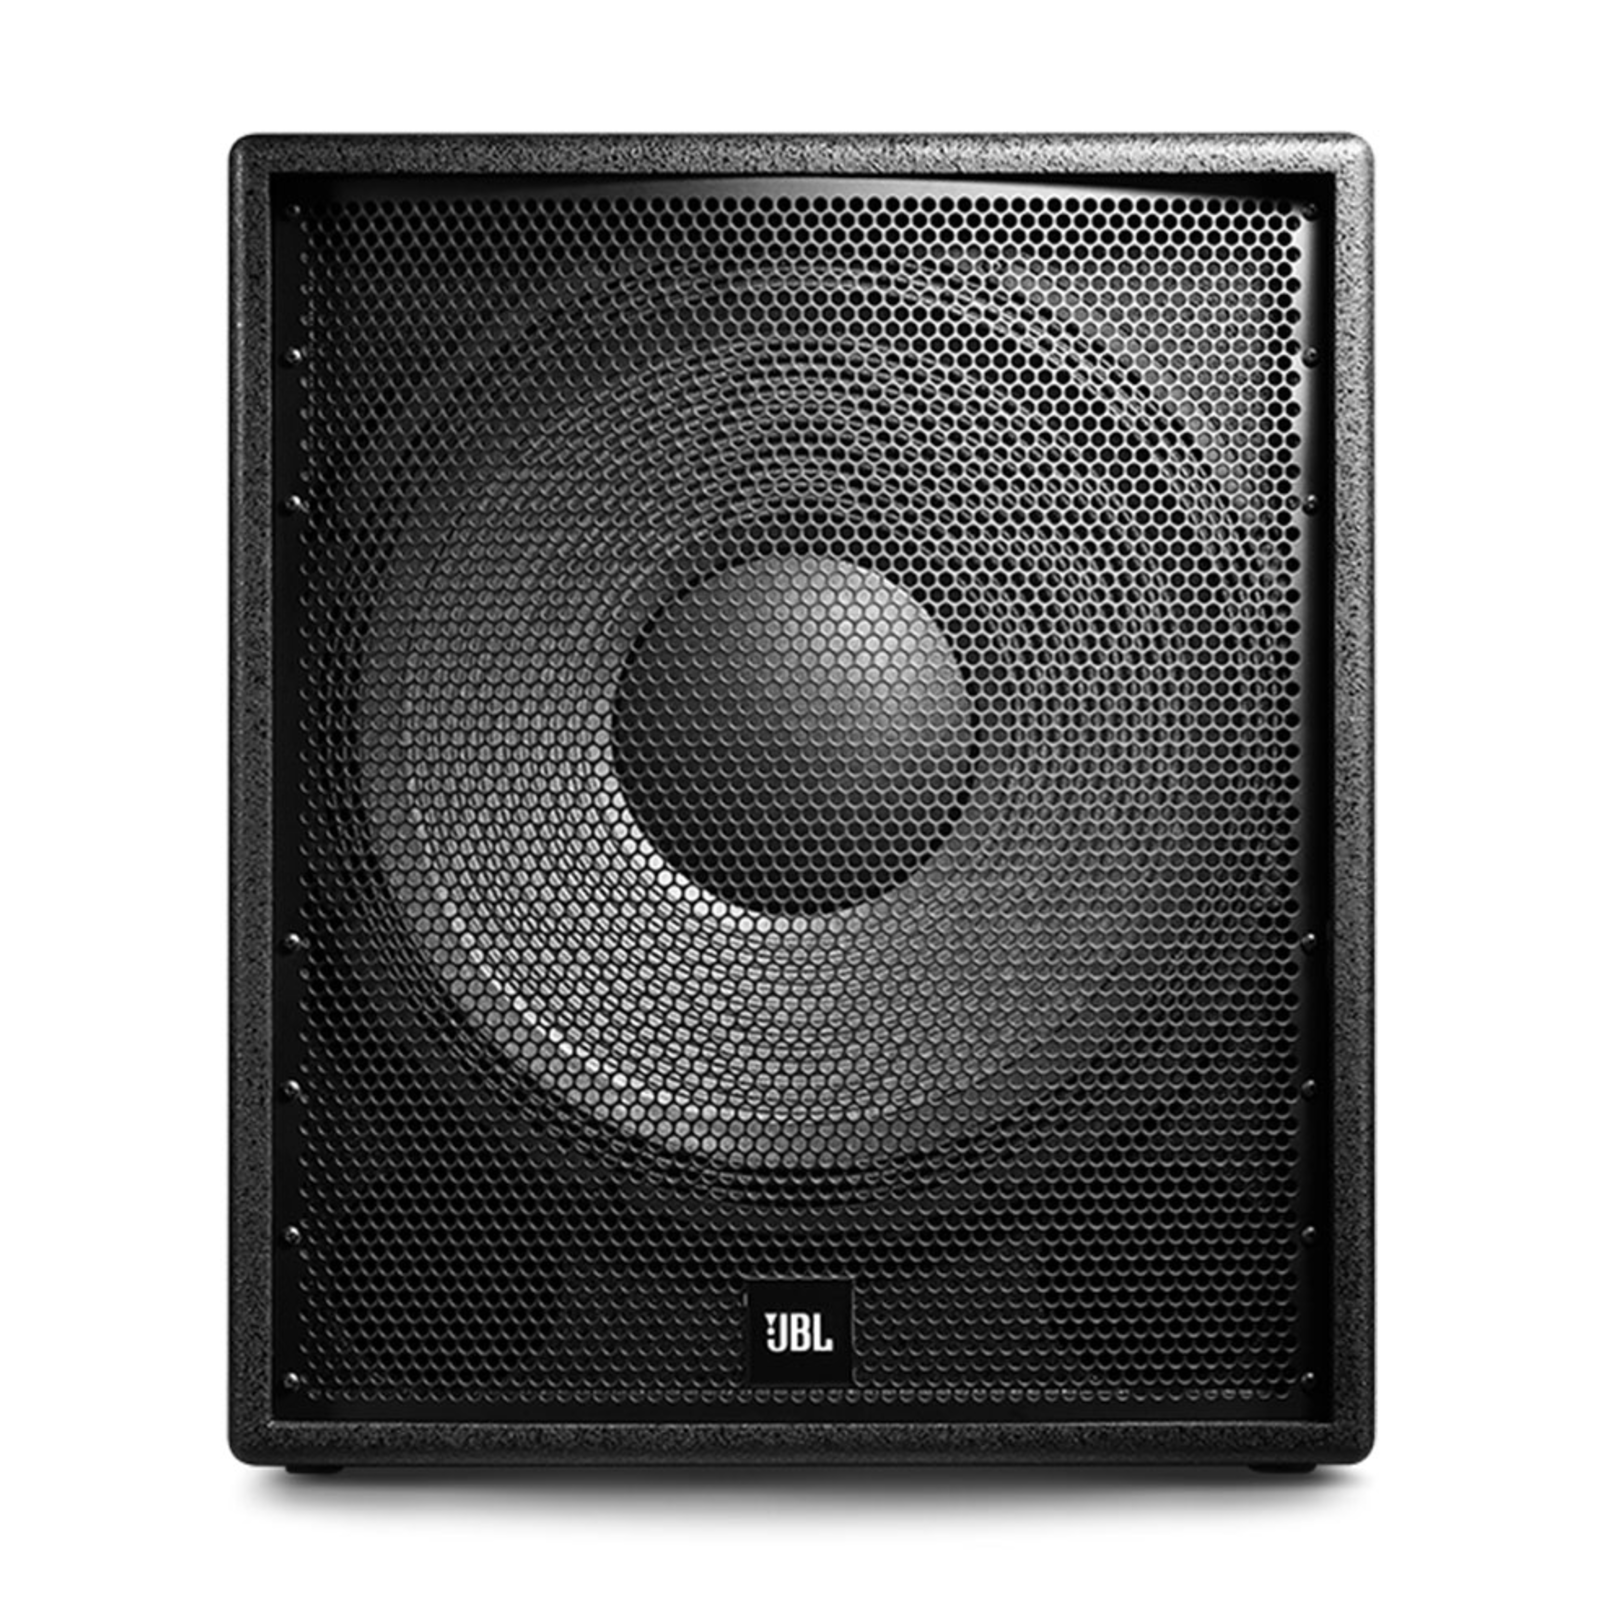 PRX318SD - Black - 18" Compact Subwoofer System - Hero